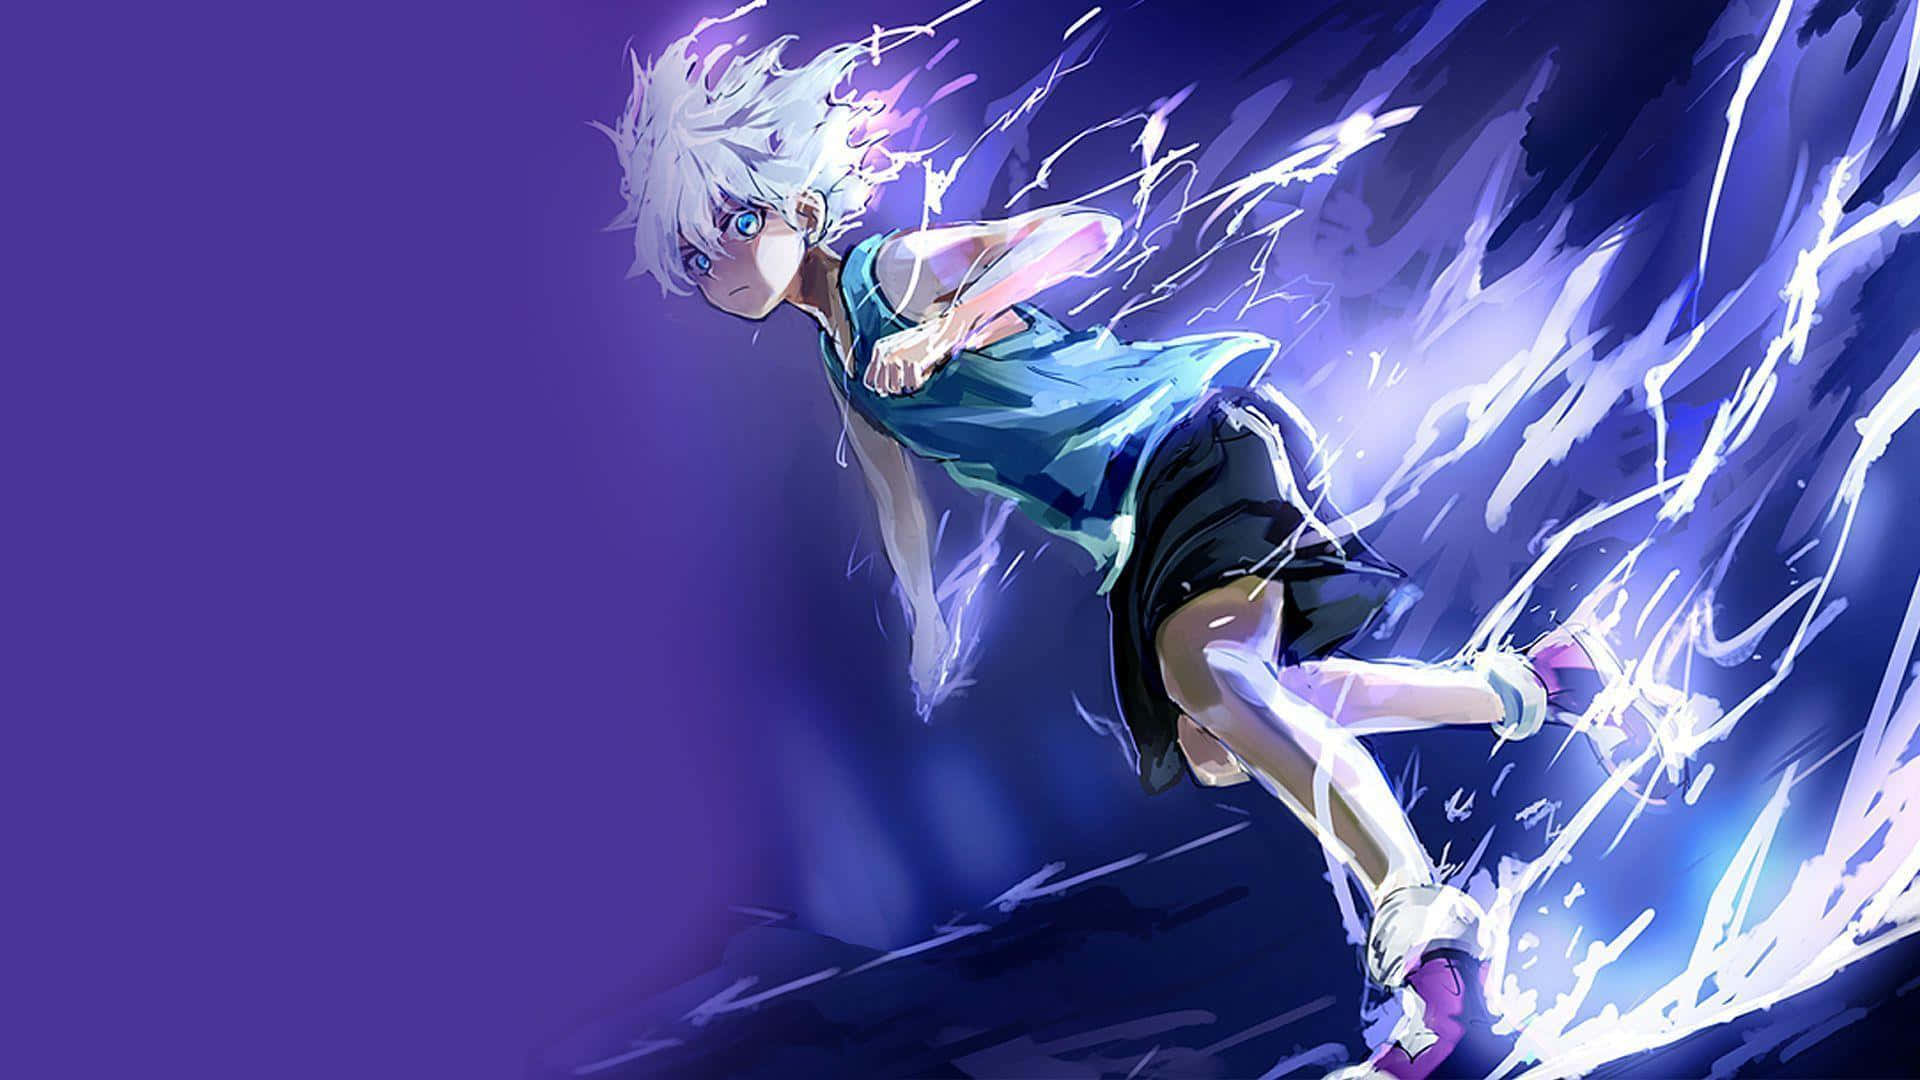 "Cute Killua from Hunter X Hunter is here to make your day brighter!" Wallpaper